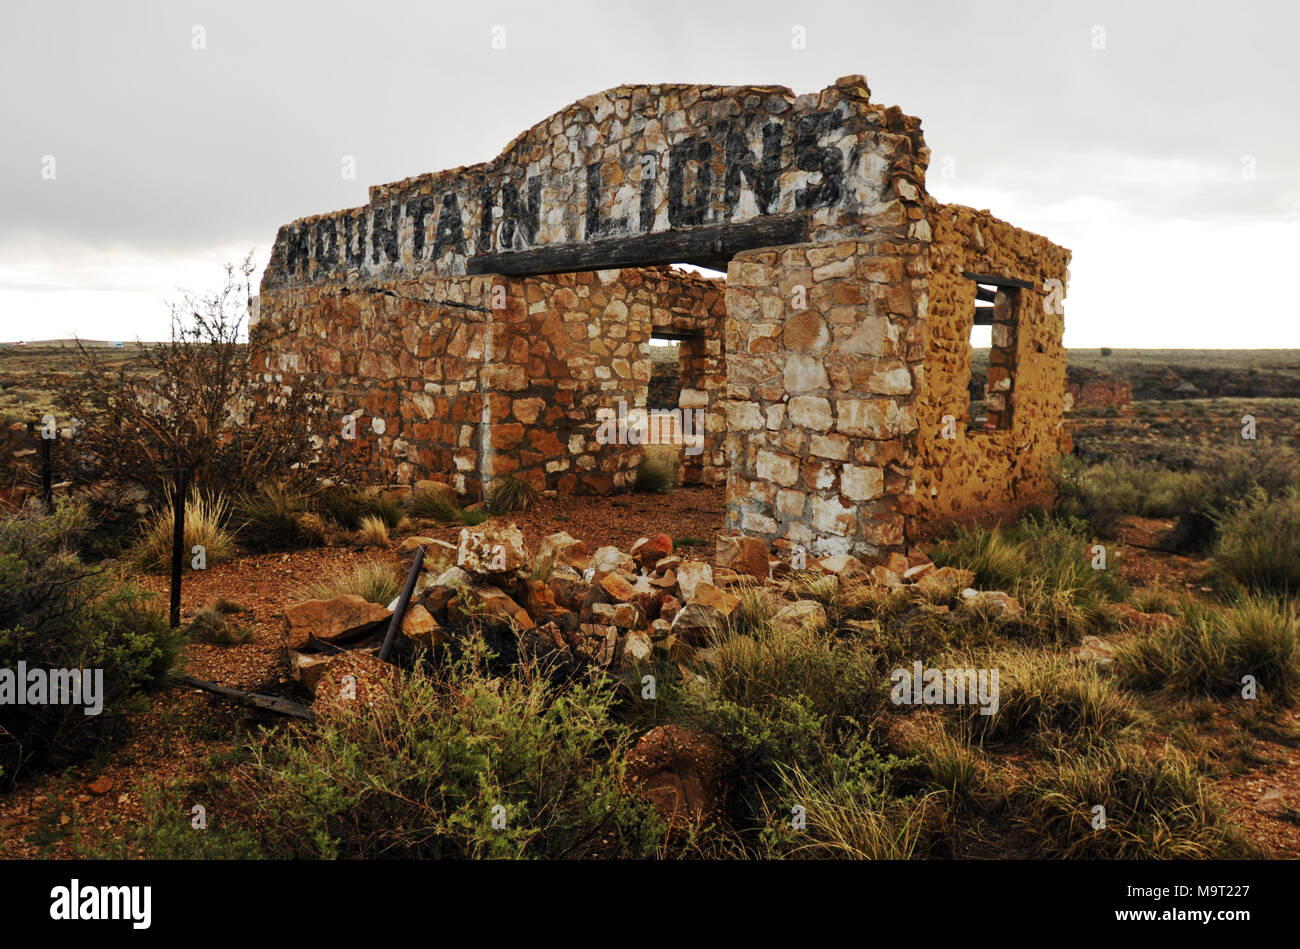 The crumbling stone mountain lion building stands at the abandoned roadside zoo in Two Guns, Arizona, once a popular tourist attraction on Route 66. Stock Photo